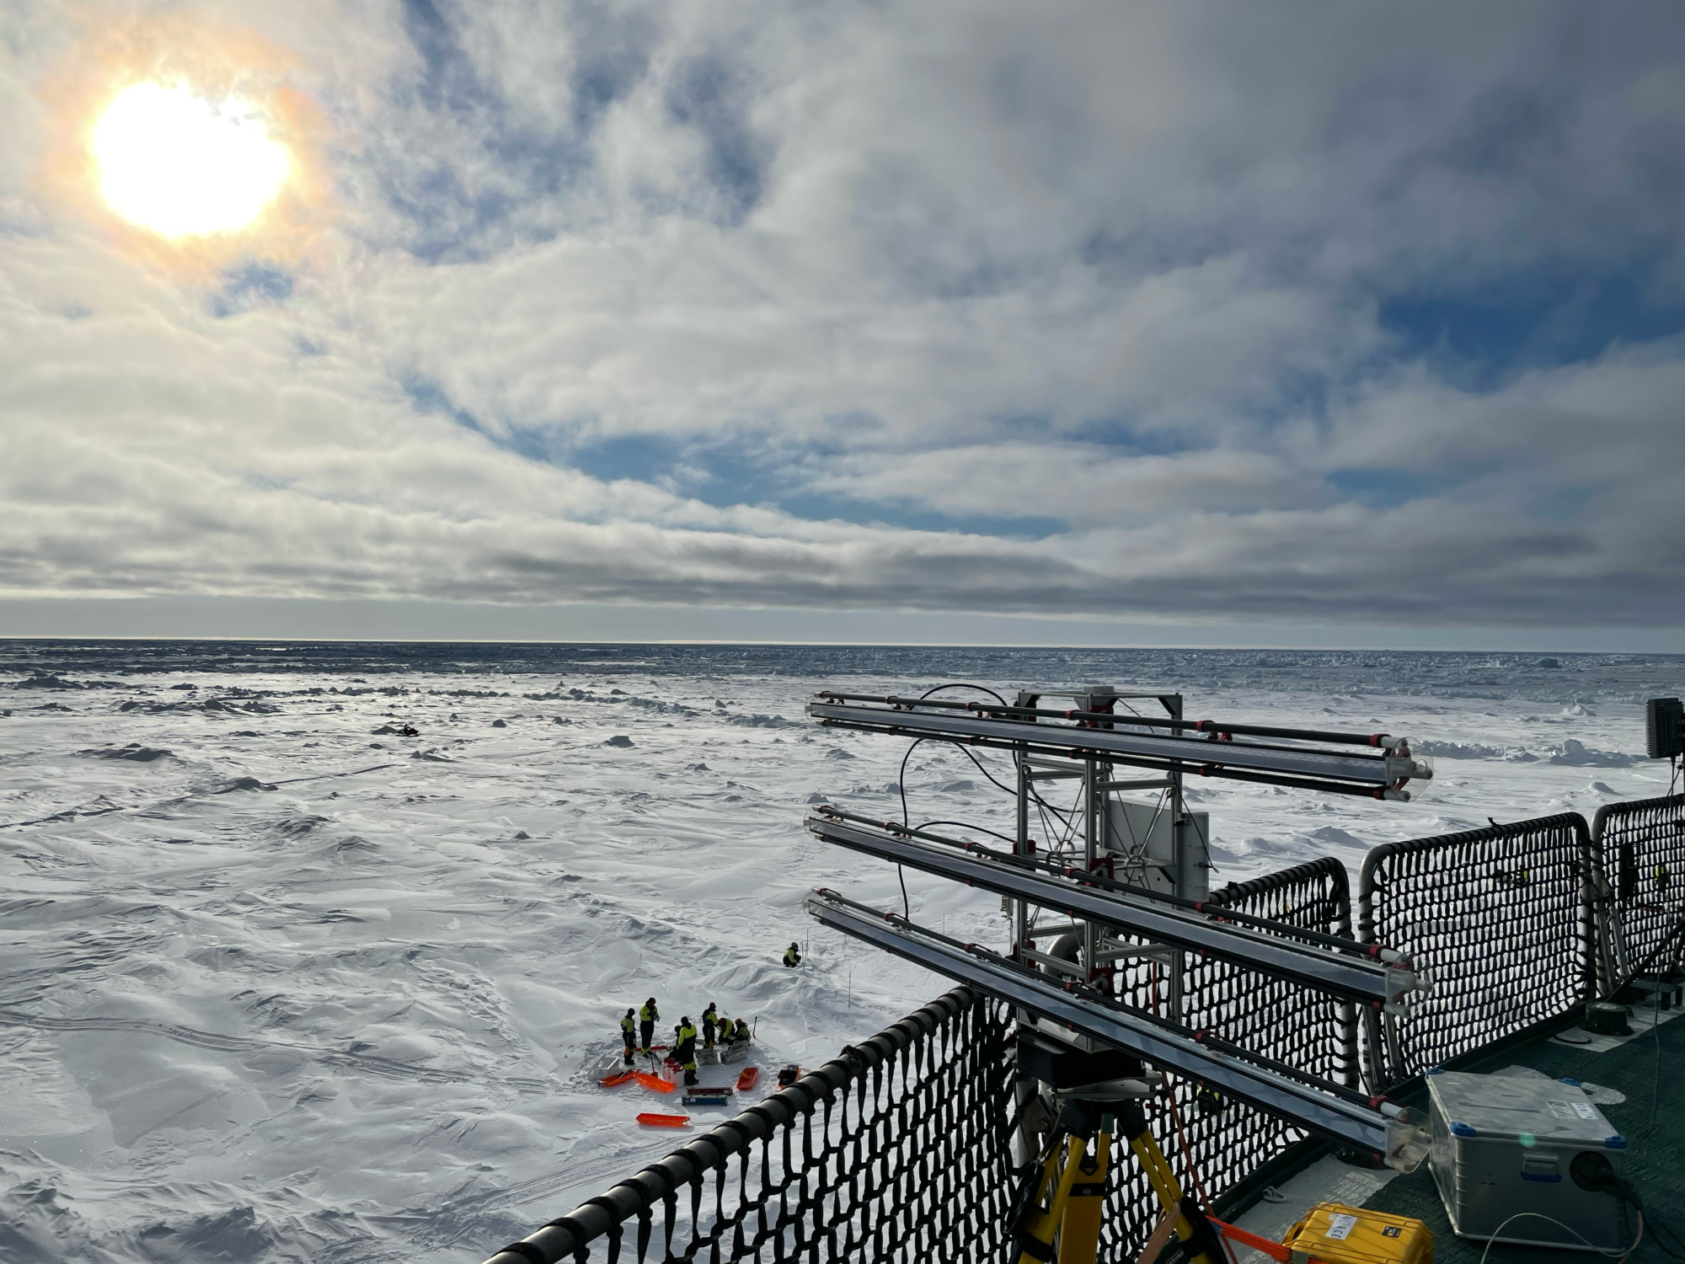 Tom Rune Lauknes, The ku-band radar provides valuable information about ice drift and ice conditions., Cirfa 7343, , 